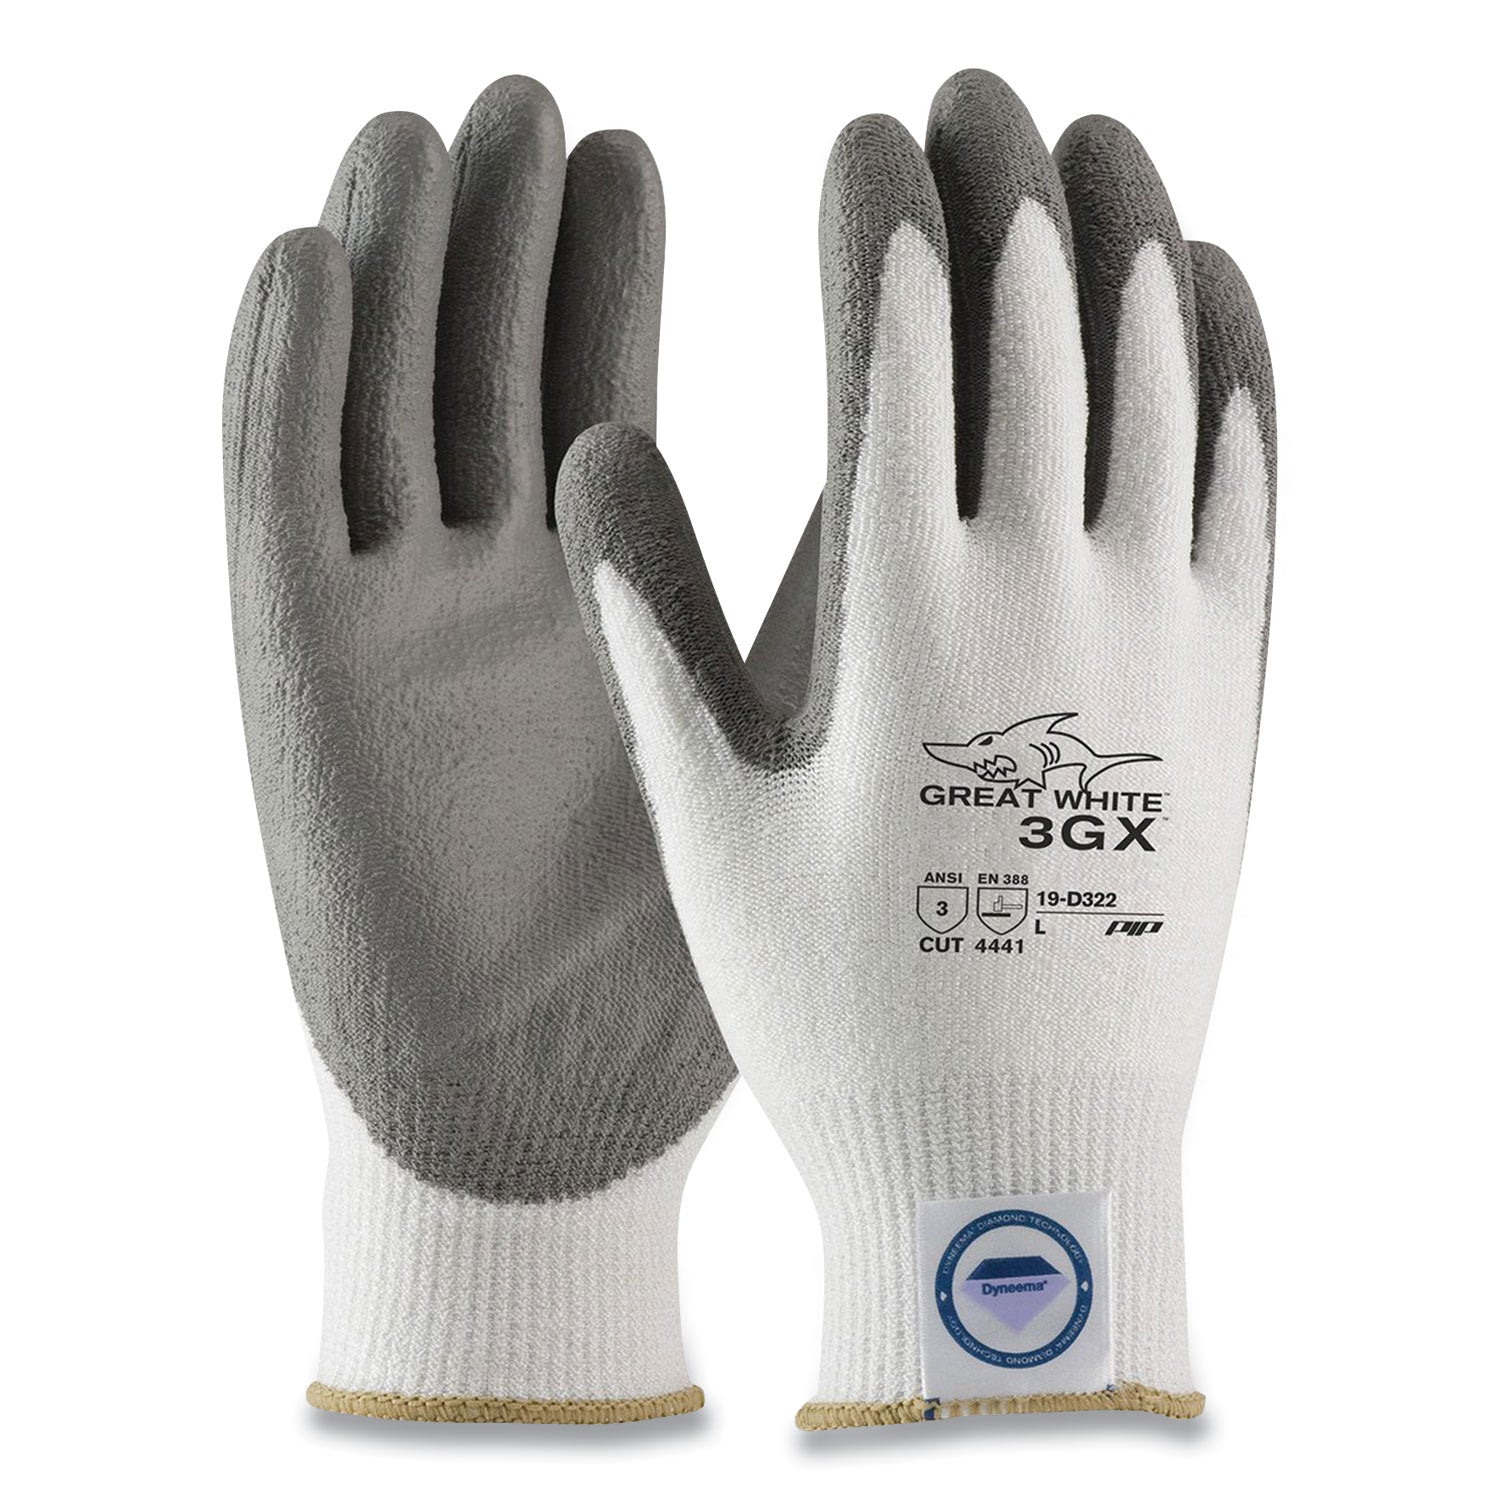 great-white-3gx-seamless-knit-dyneema-diamond-blended-gloves-small-white-gray_pid19d322s - 1